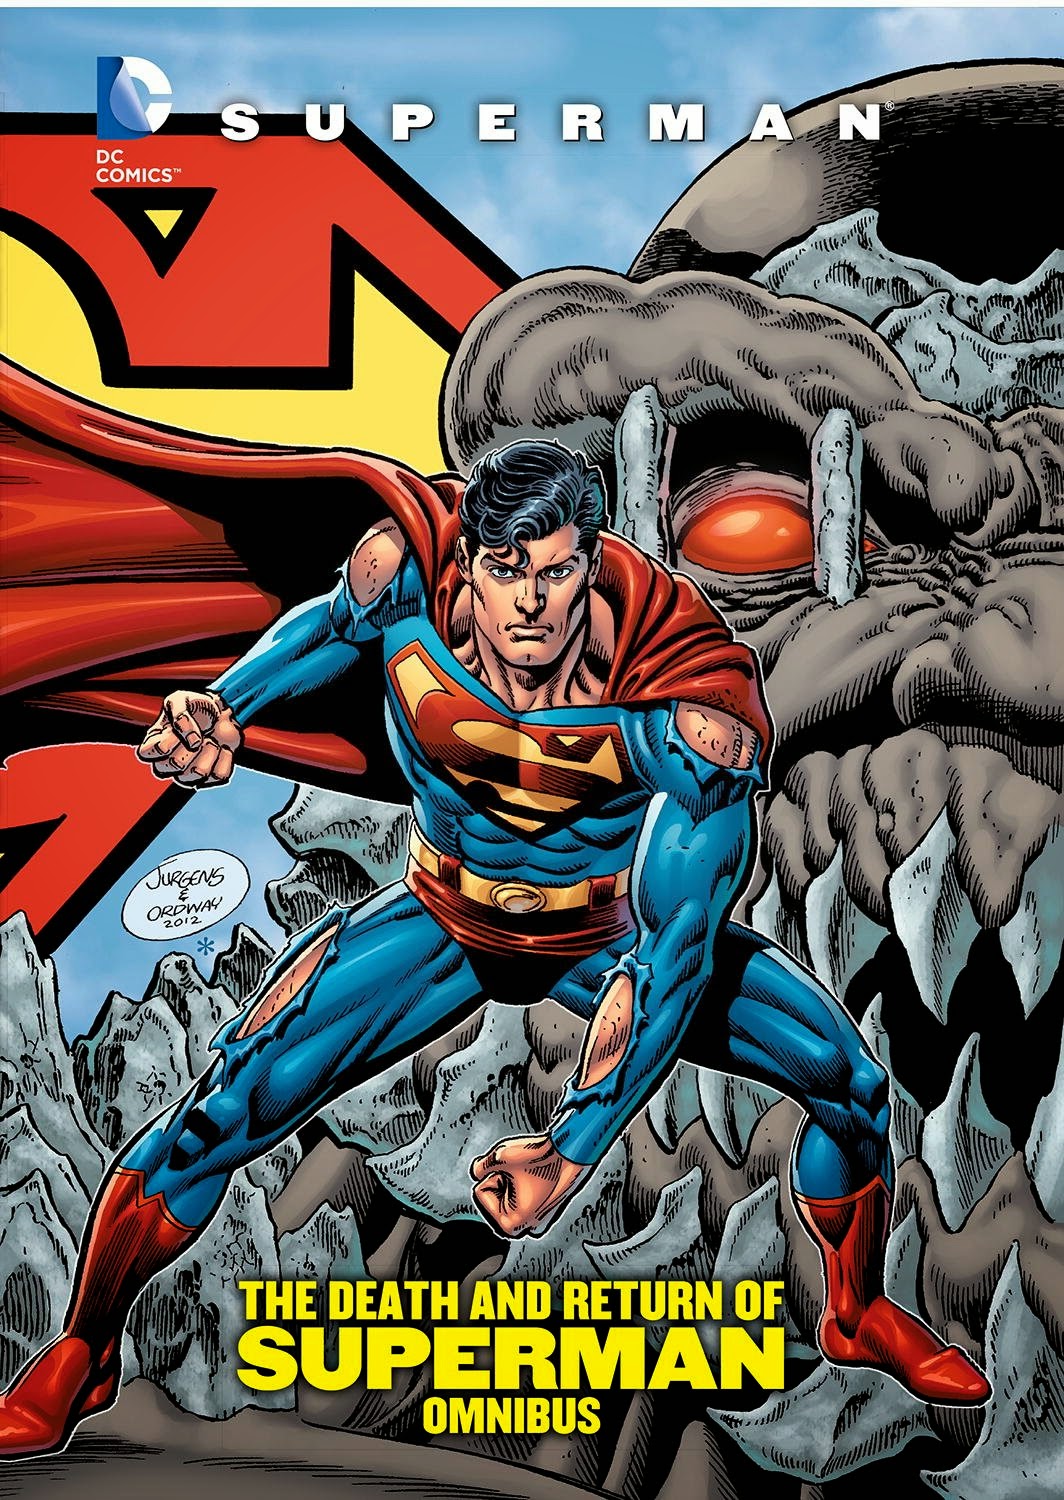 NOT A HOAX! NOT A DREAM!: THE DEATH AND RETURN OF SUPERMAN OMNIBUS